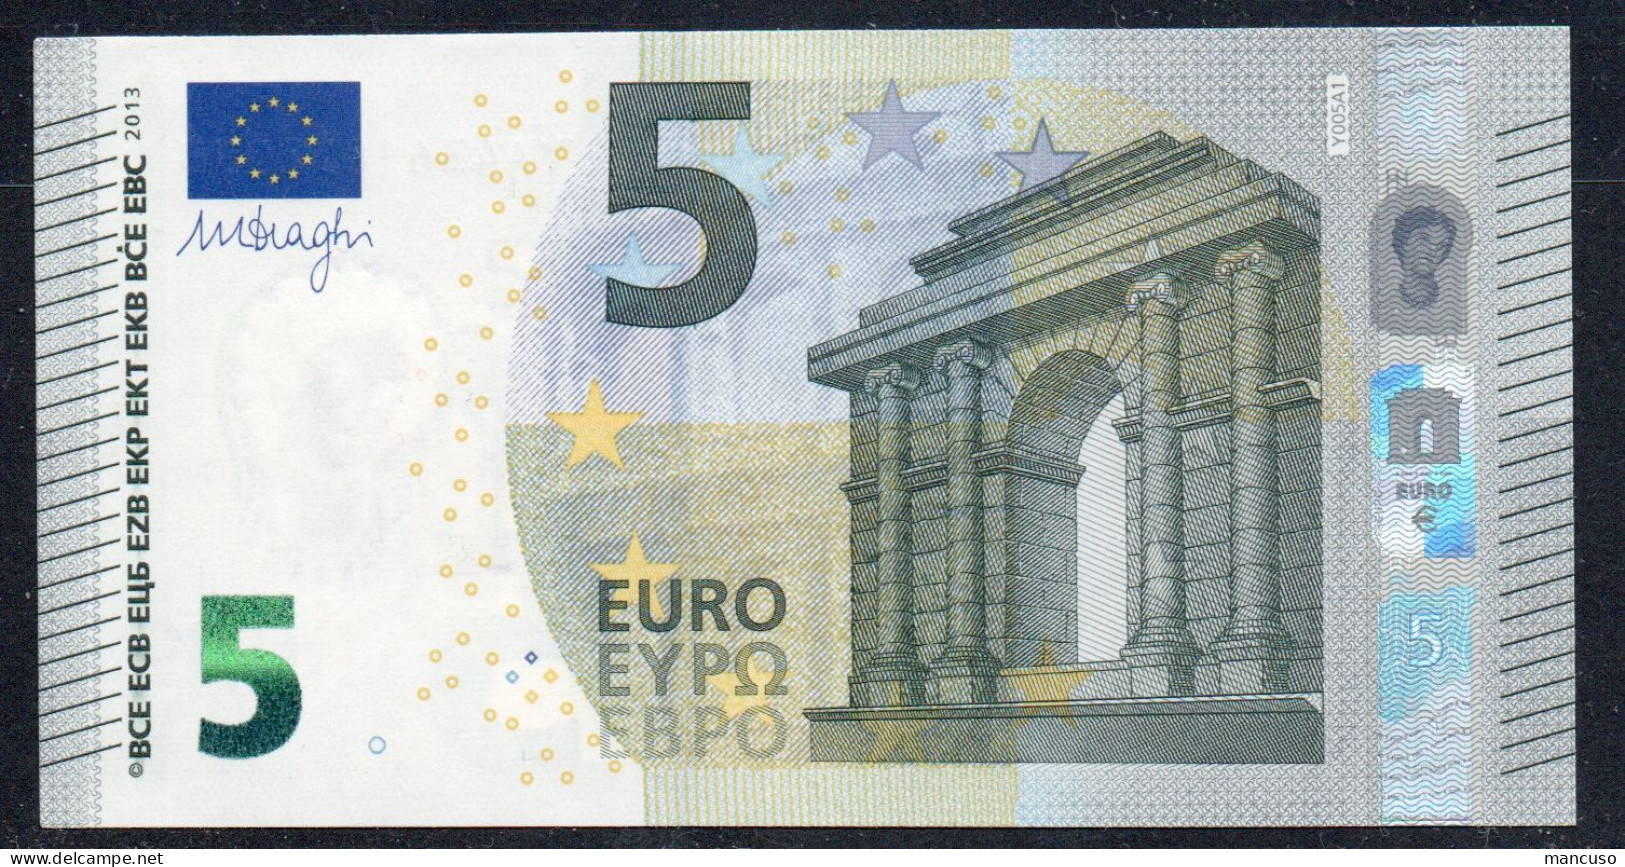 &euro; 5 GREECE  Y005 A1 - FIRST POSITION - DRAGHI  UNC - 5 Euro